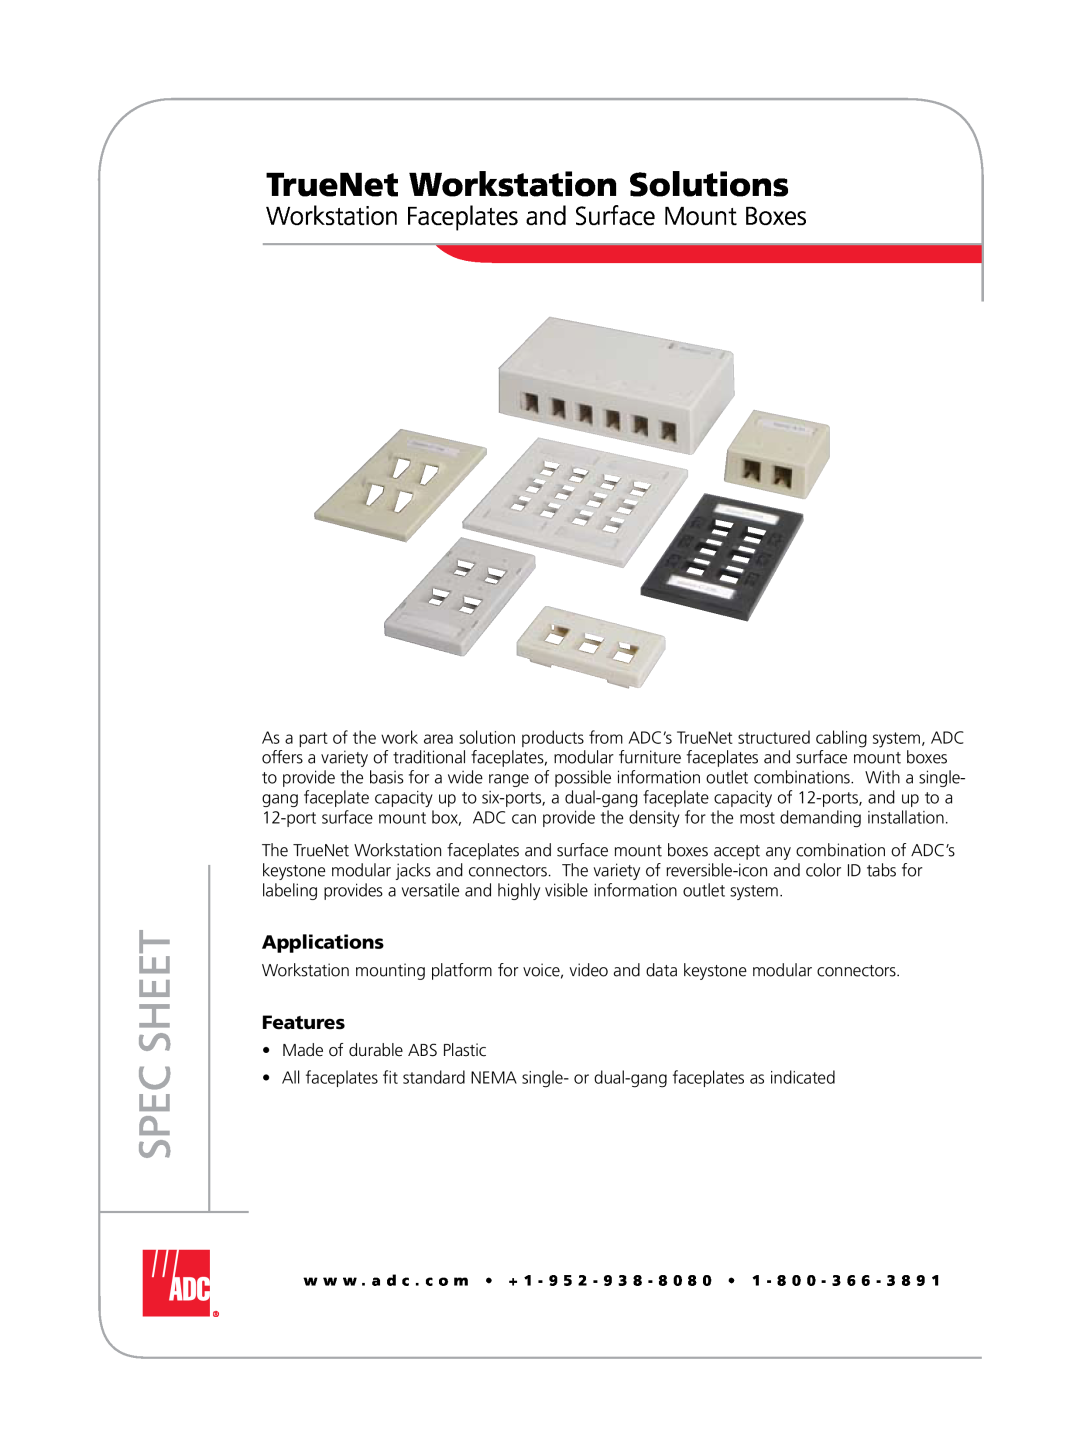 ADC none manual TrueNet Workstation Solutions, Workstation Faceplates and Surface Mount Boxes, Spec Sheet, Applications 